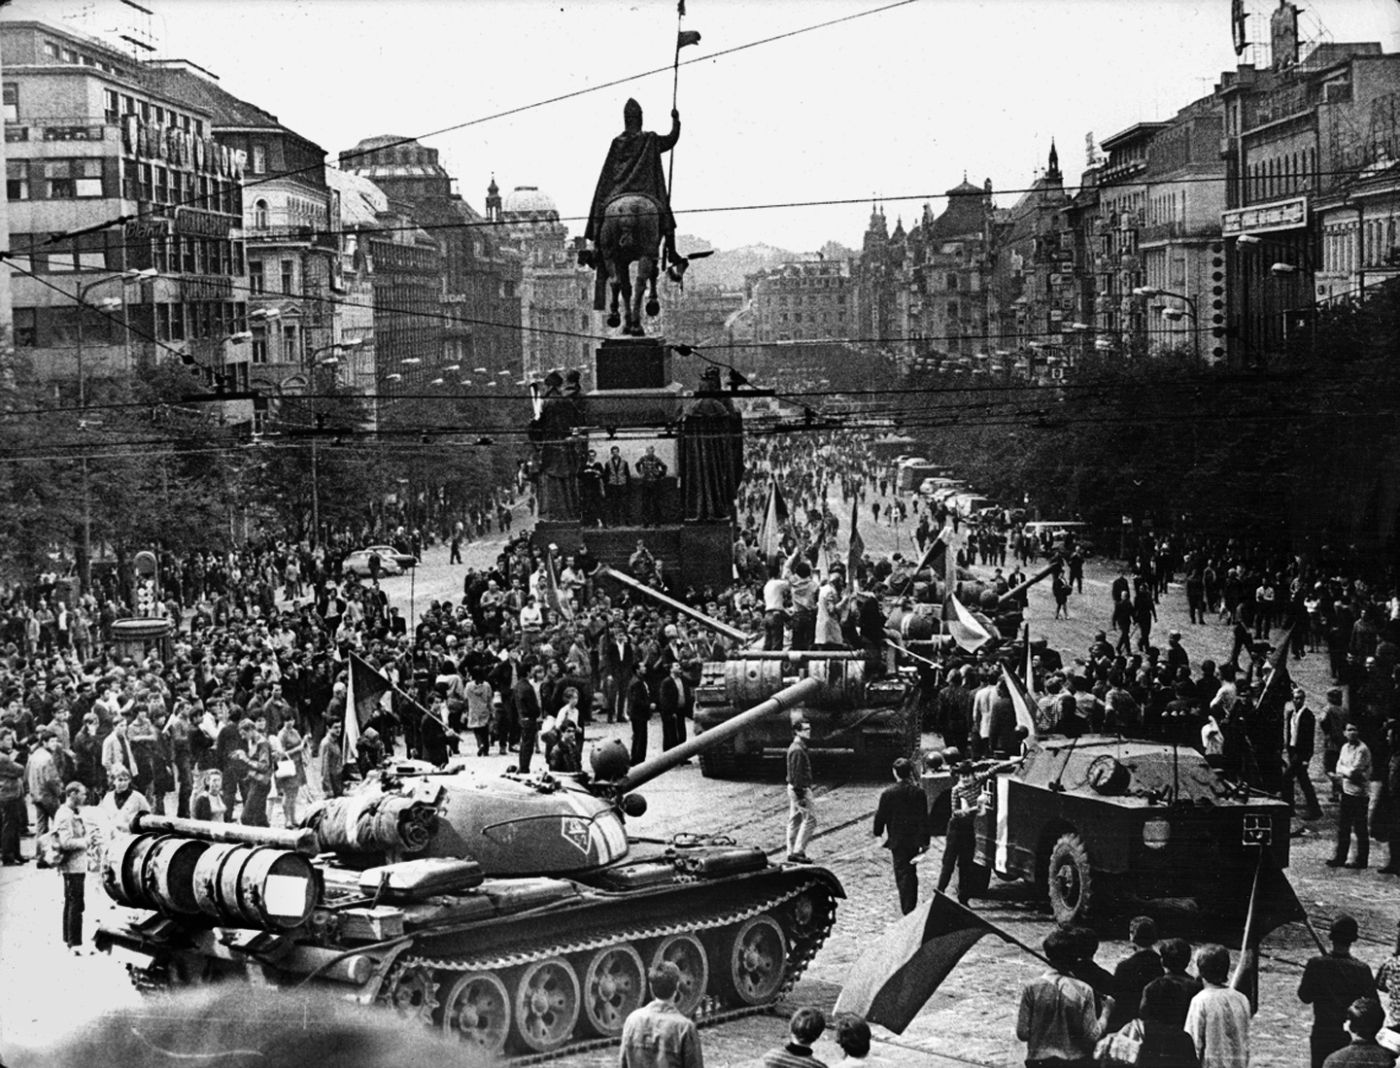 Soviet troops swarm Wenceslas Square on August 21, 1968. The centrally located square was one of the focal points of invading forces. 